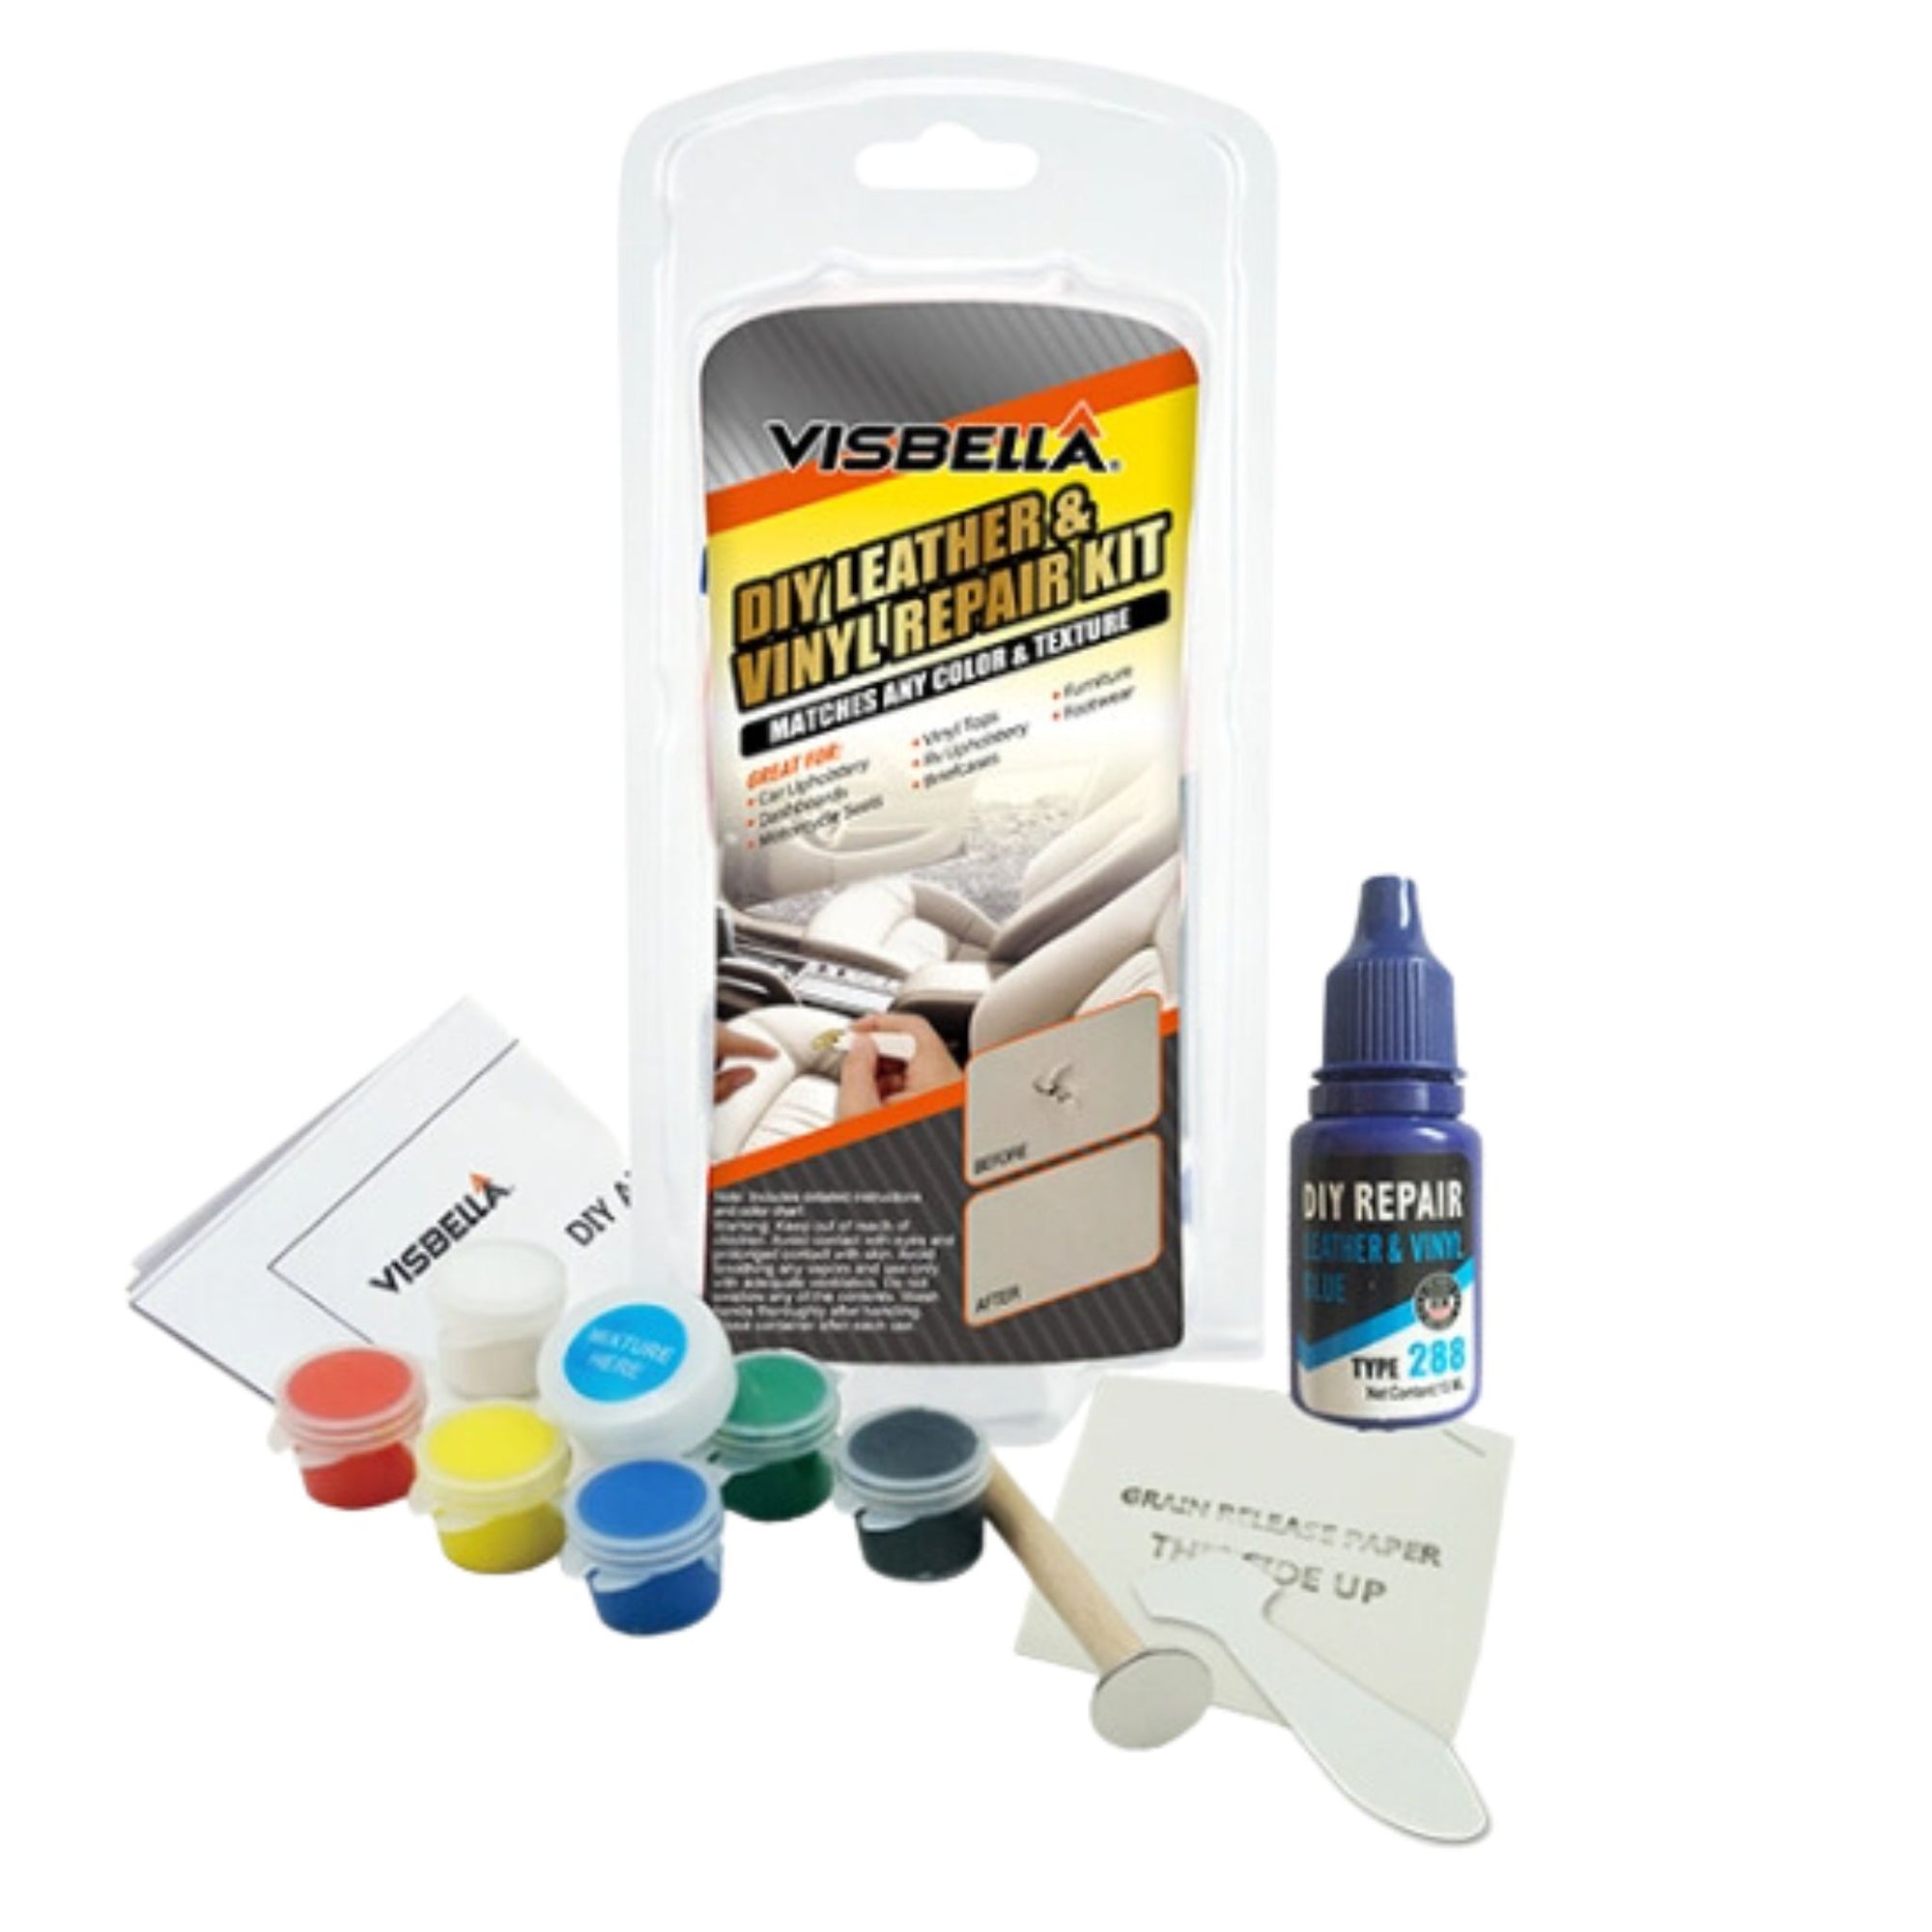 COLORBOND Vinyl, Leather & Plastic Spray Paint-CLEARANCE PRICED